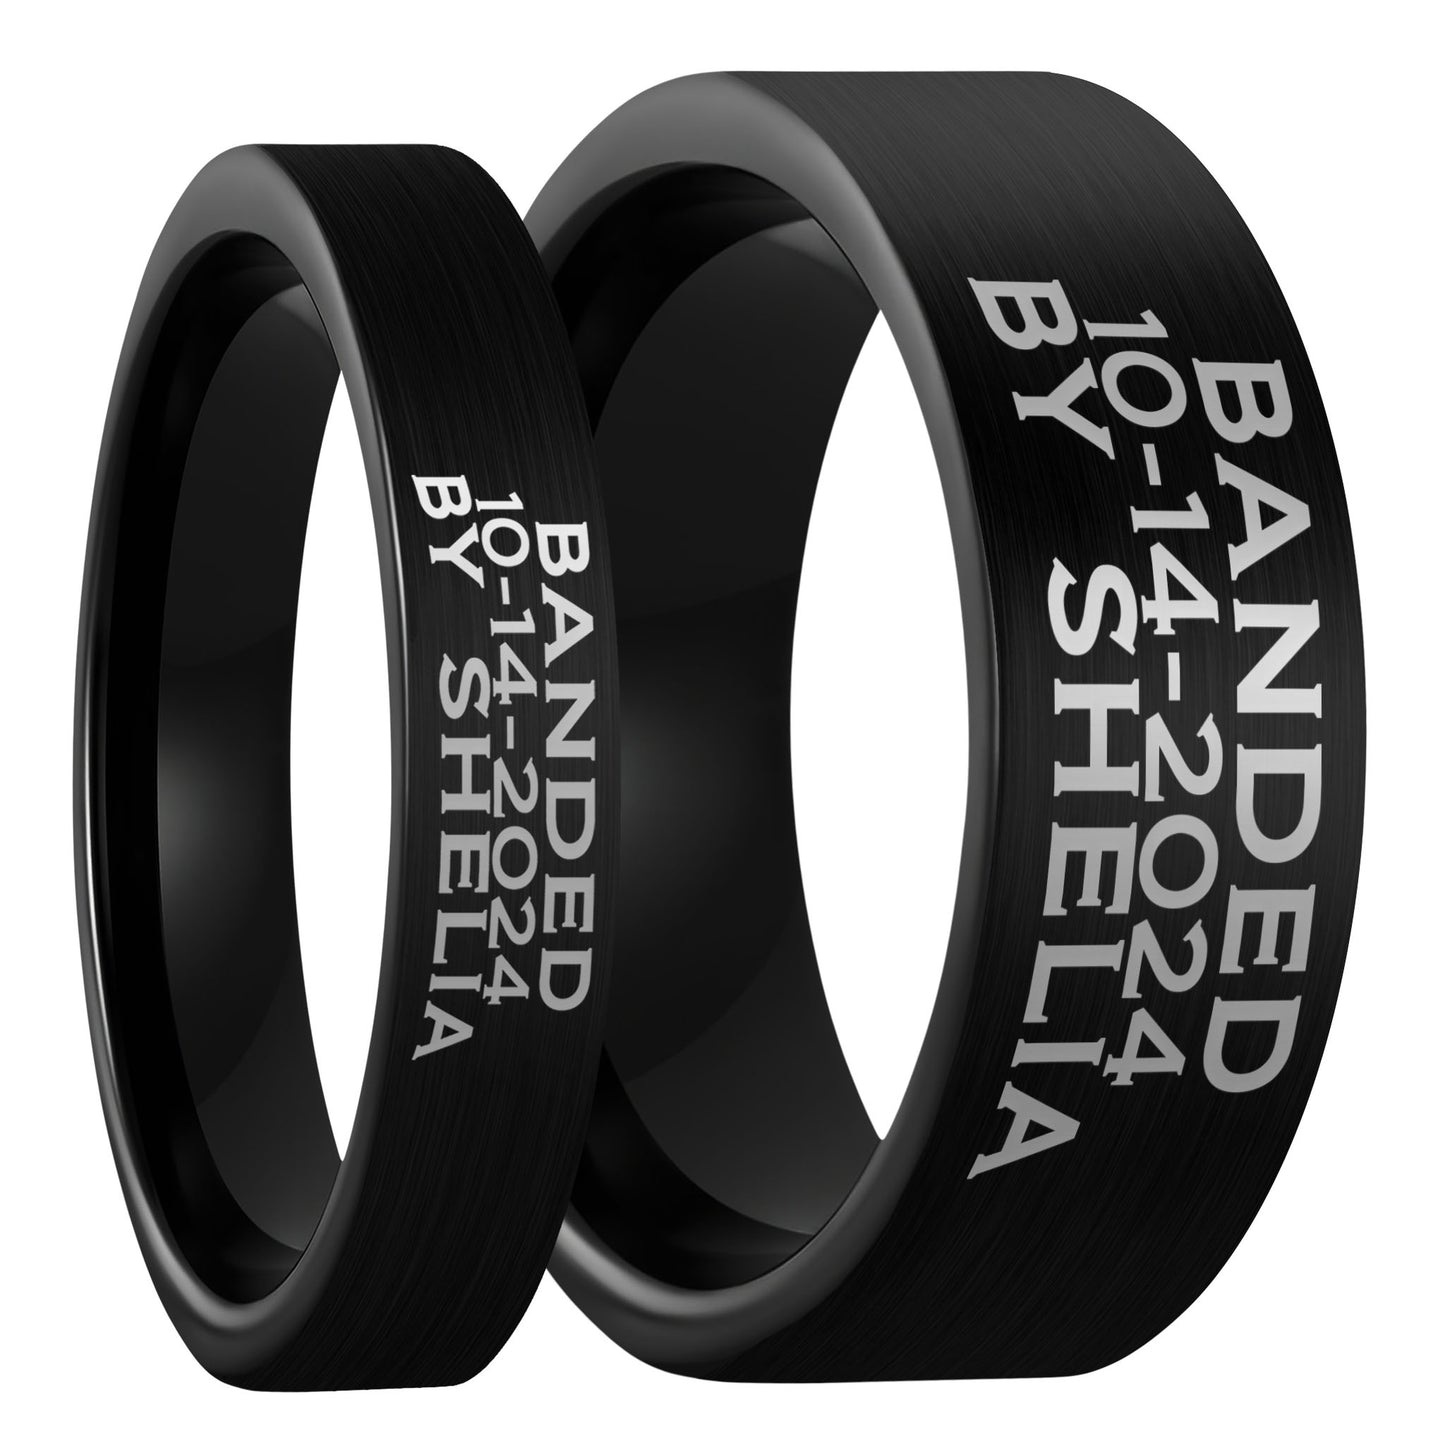 Duck Band Custom Engraved Brushed Black Tungsten Couple's Matching Ring Set